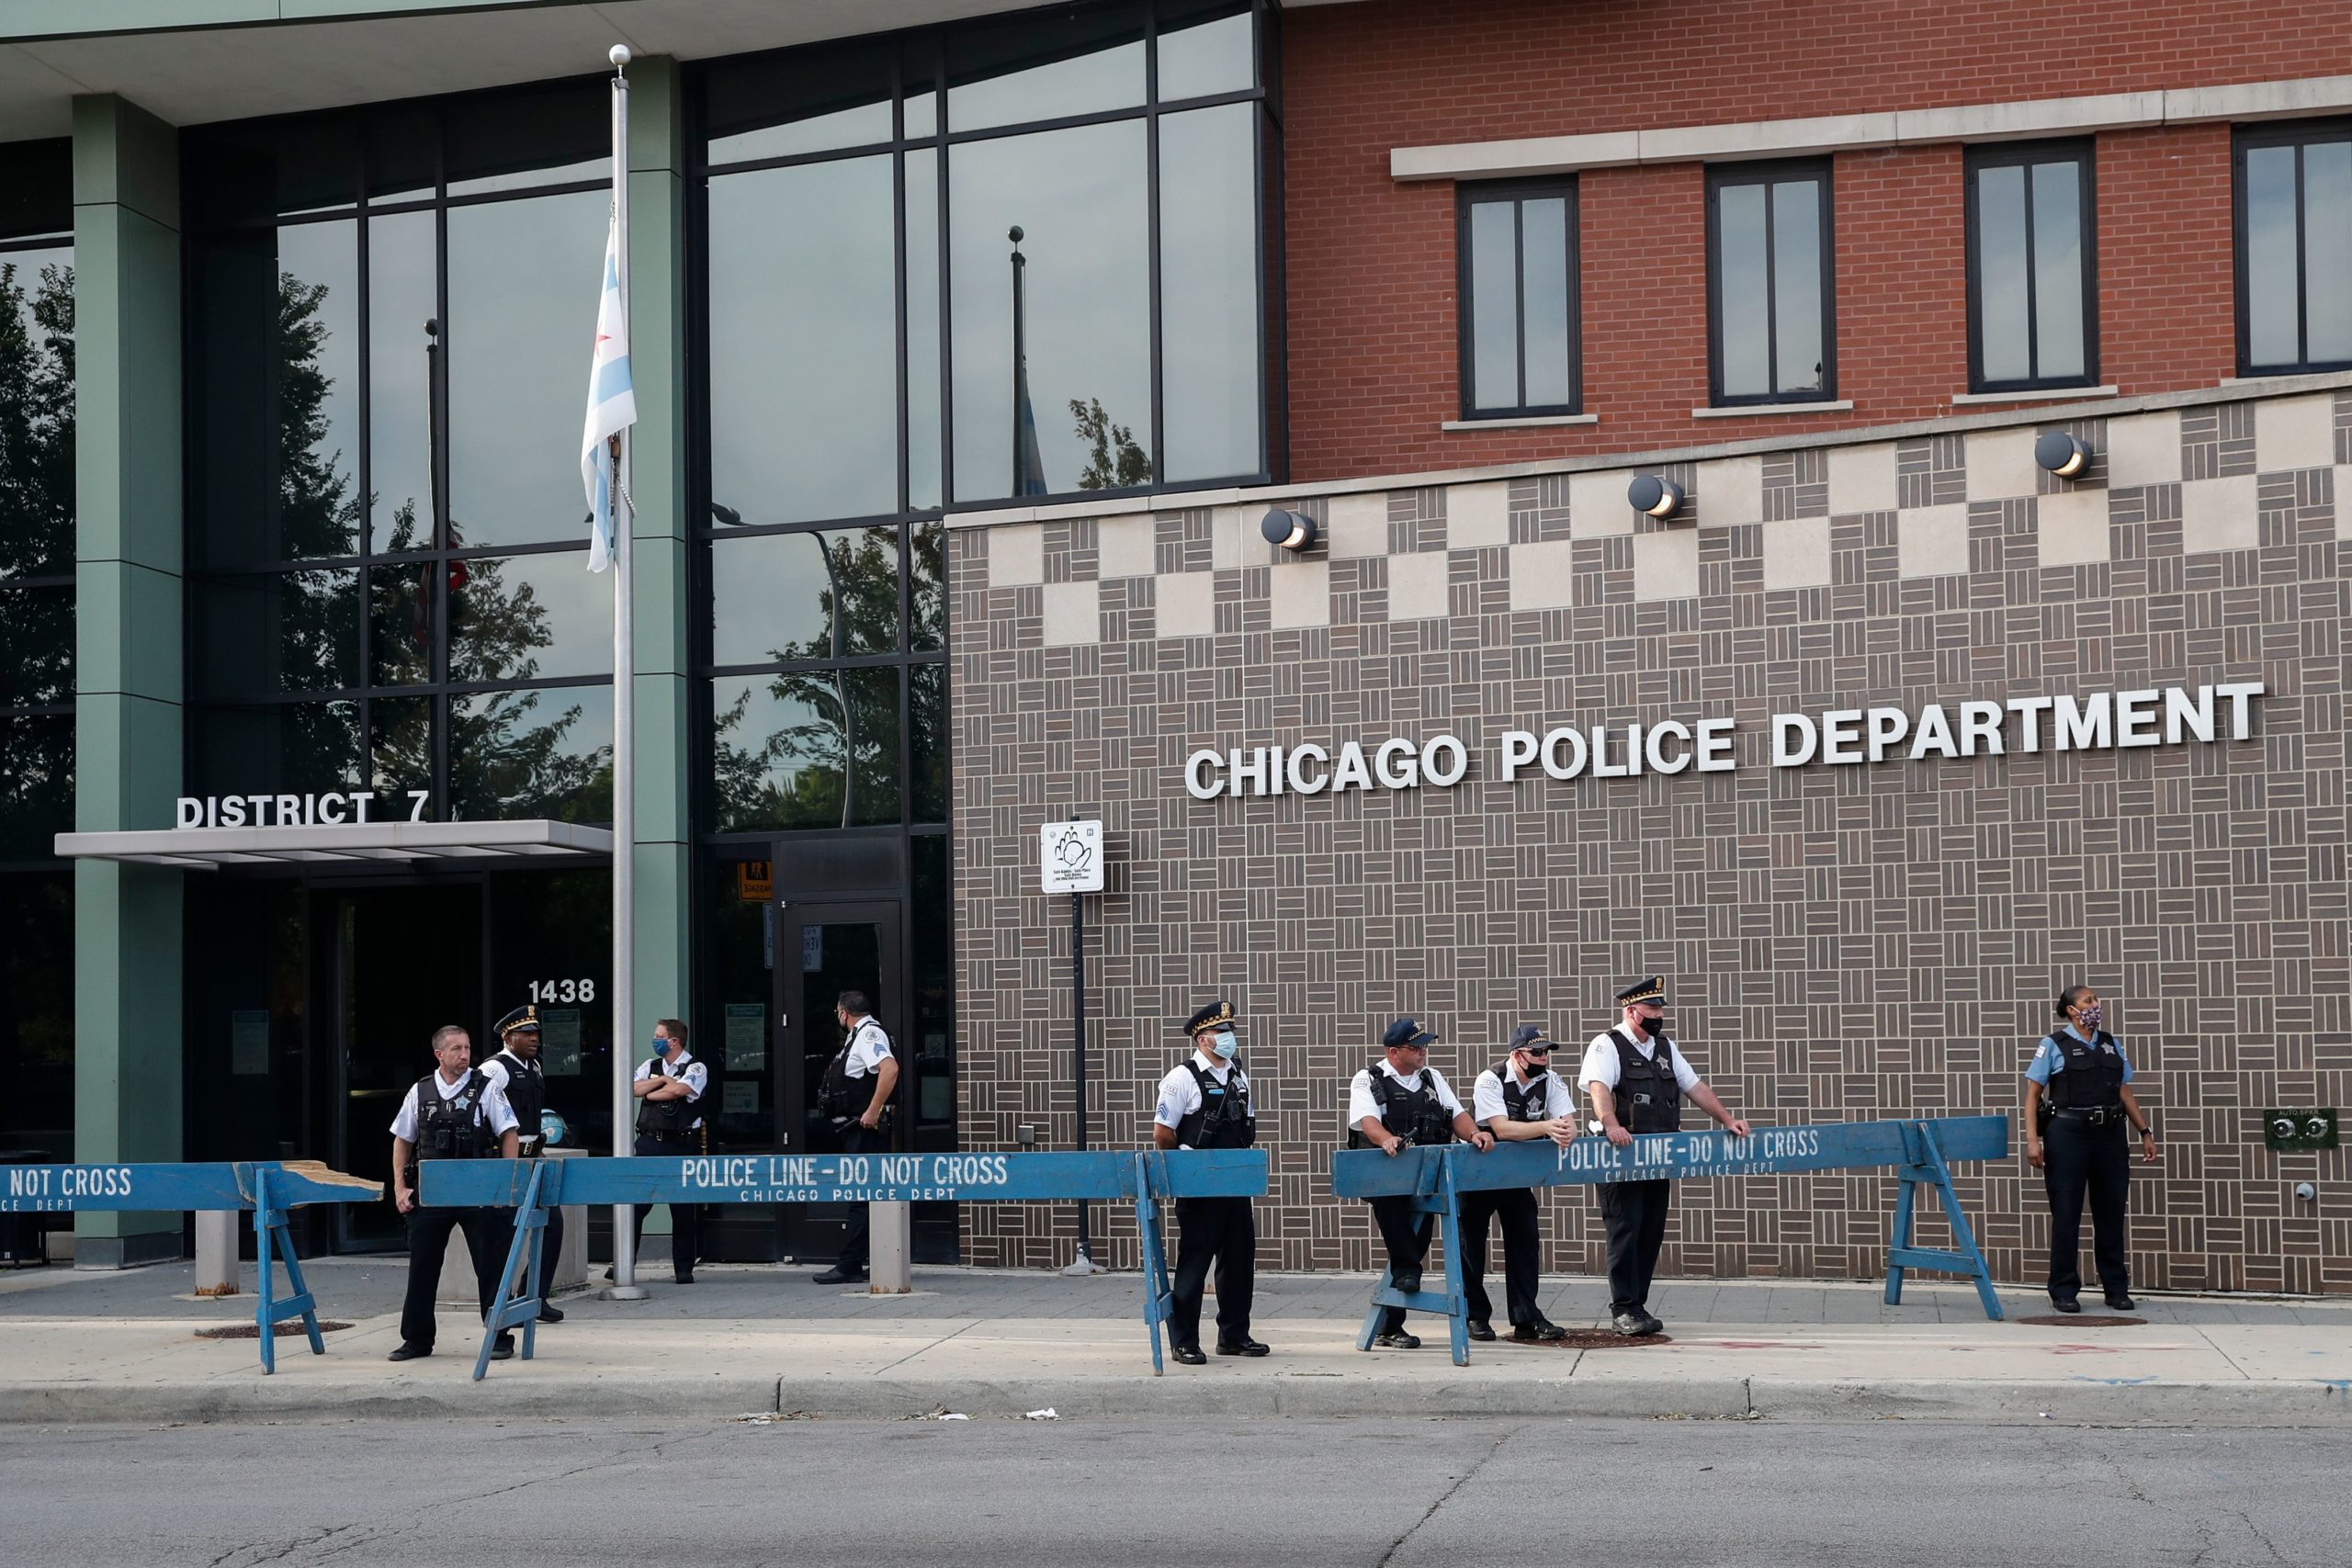 Chicago Police officers monitor the area outside their District 7 headquarters during a rally against Chicago Police violence in the Englewood neighborhood in Chicago, Illinois, on August 11, 2020. (Photo by KAMIL KRZACZYNSKI / AFP) (Photo by KAMIL KRZACZYNSKI/AFP via Getty Images)